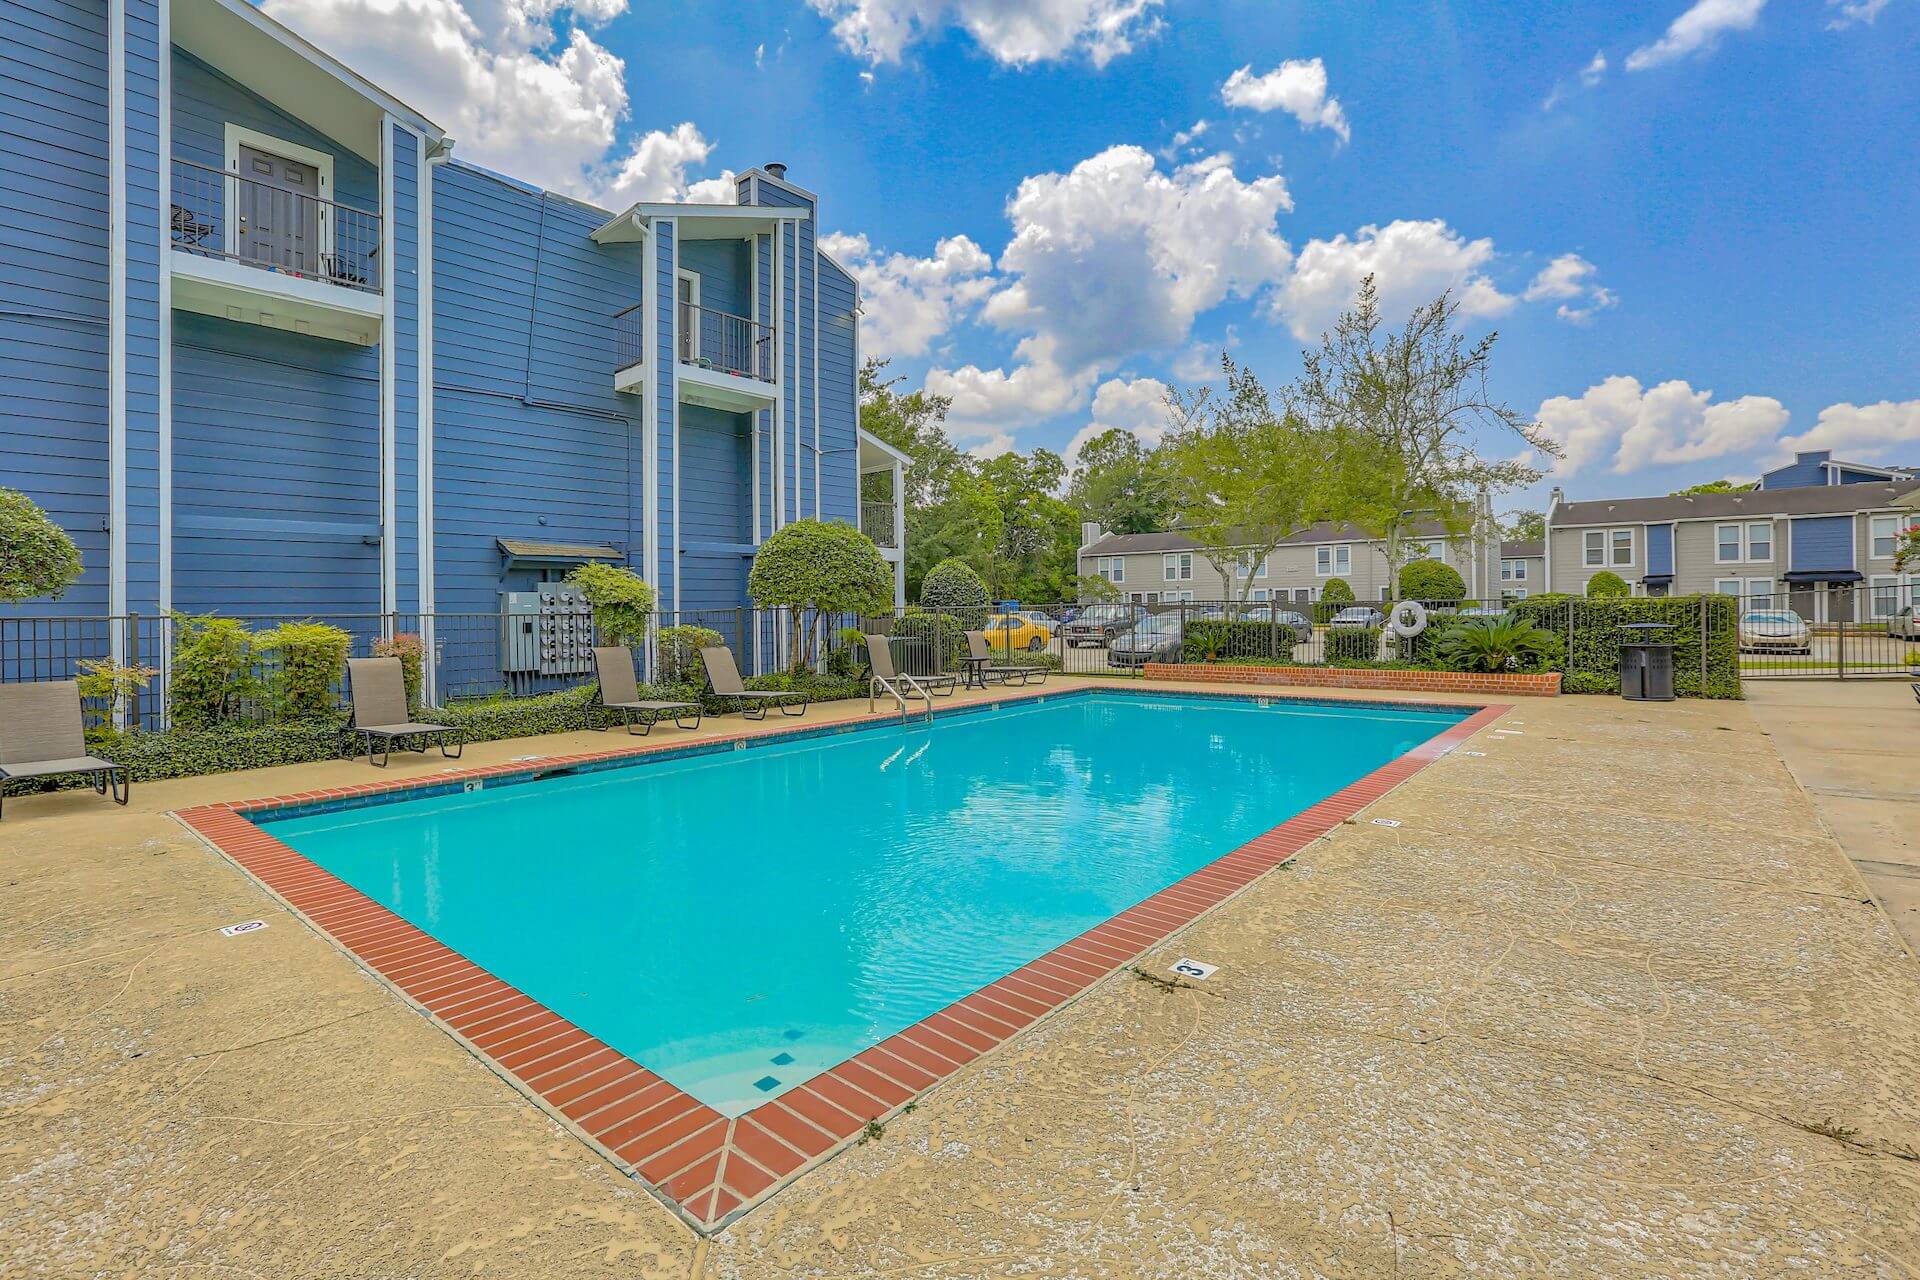 outdoor pool at fairway view apartments